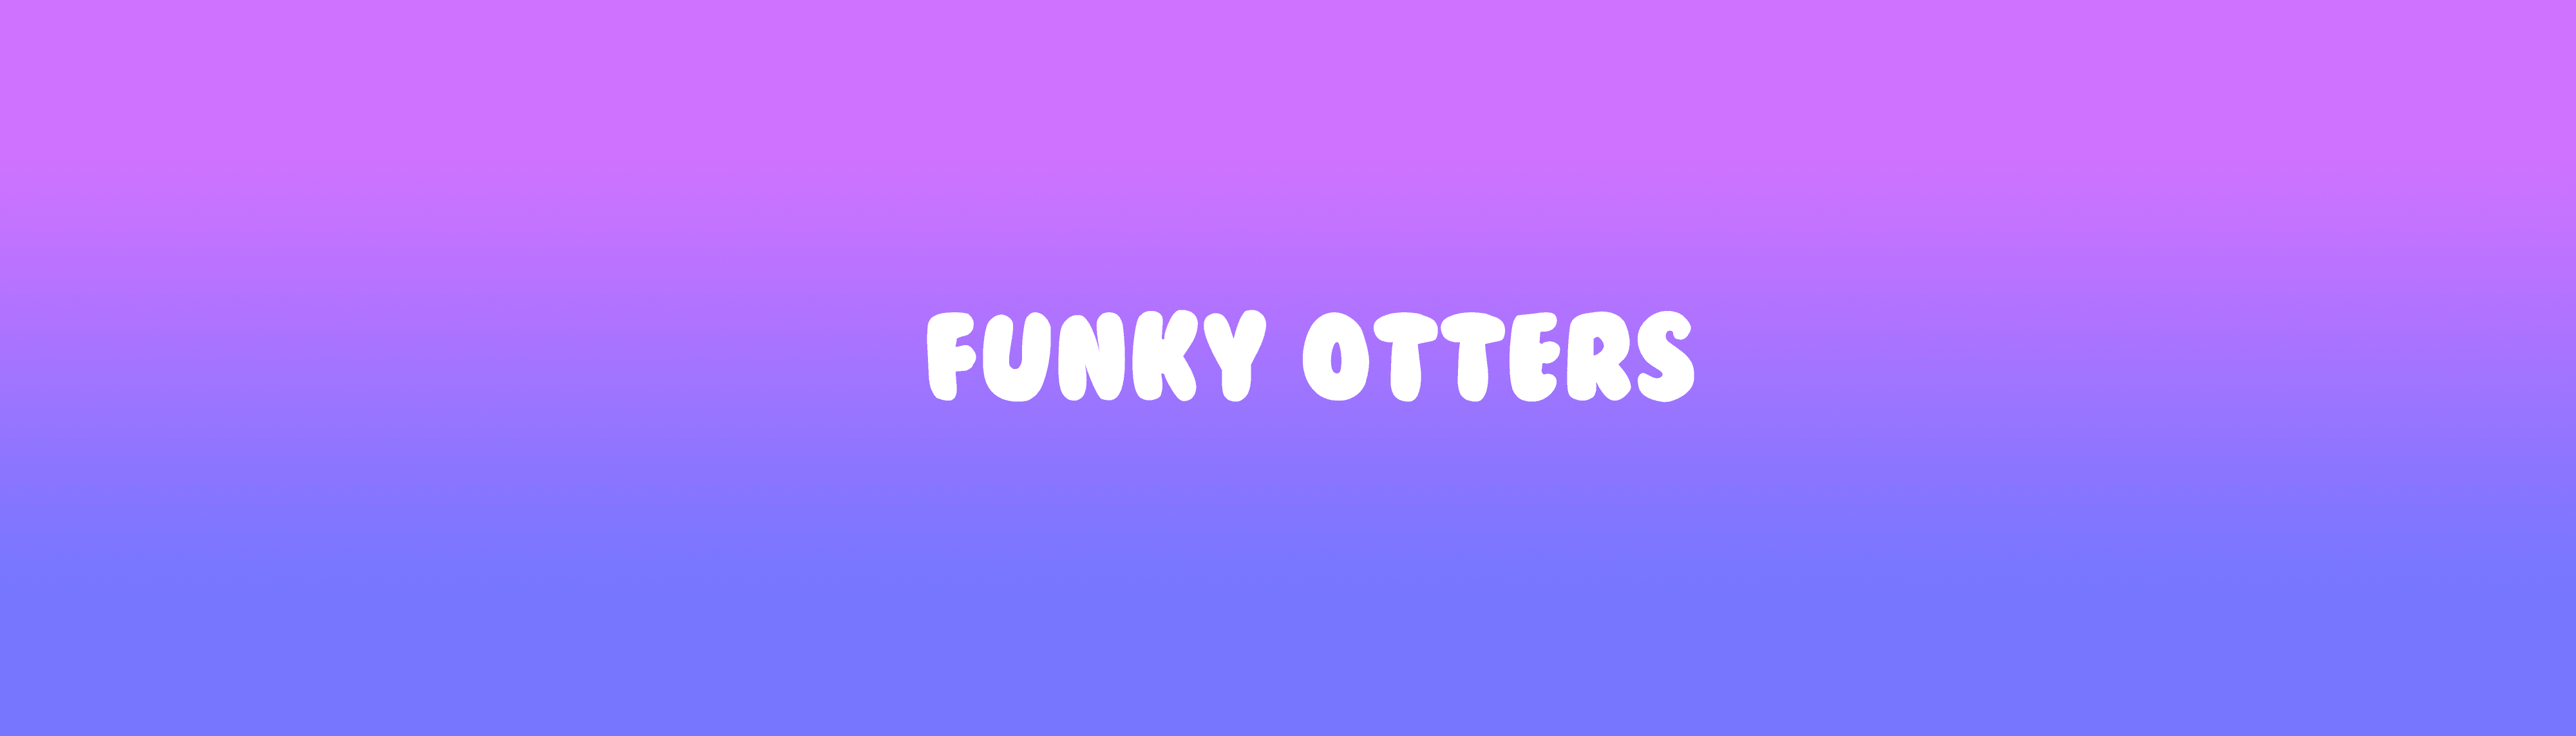 Funky Otters